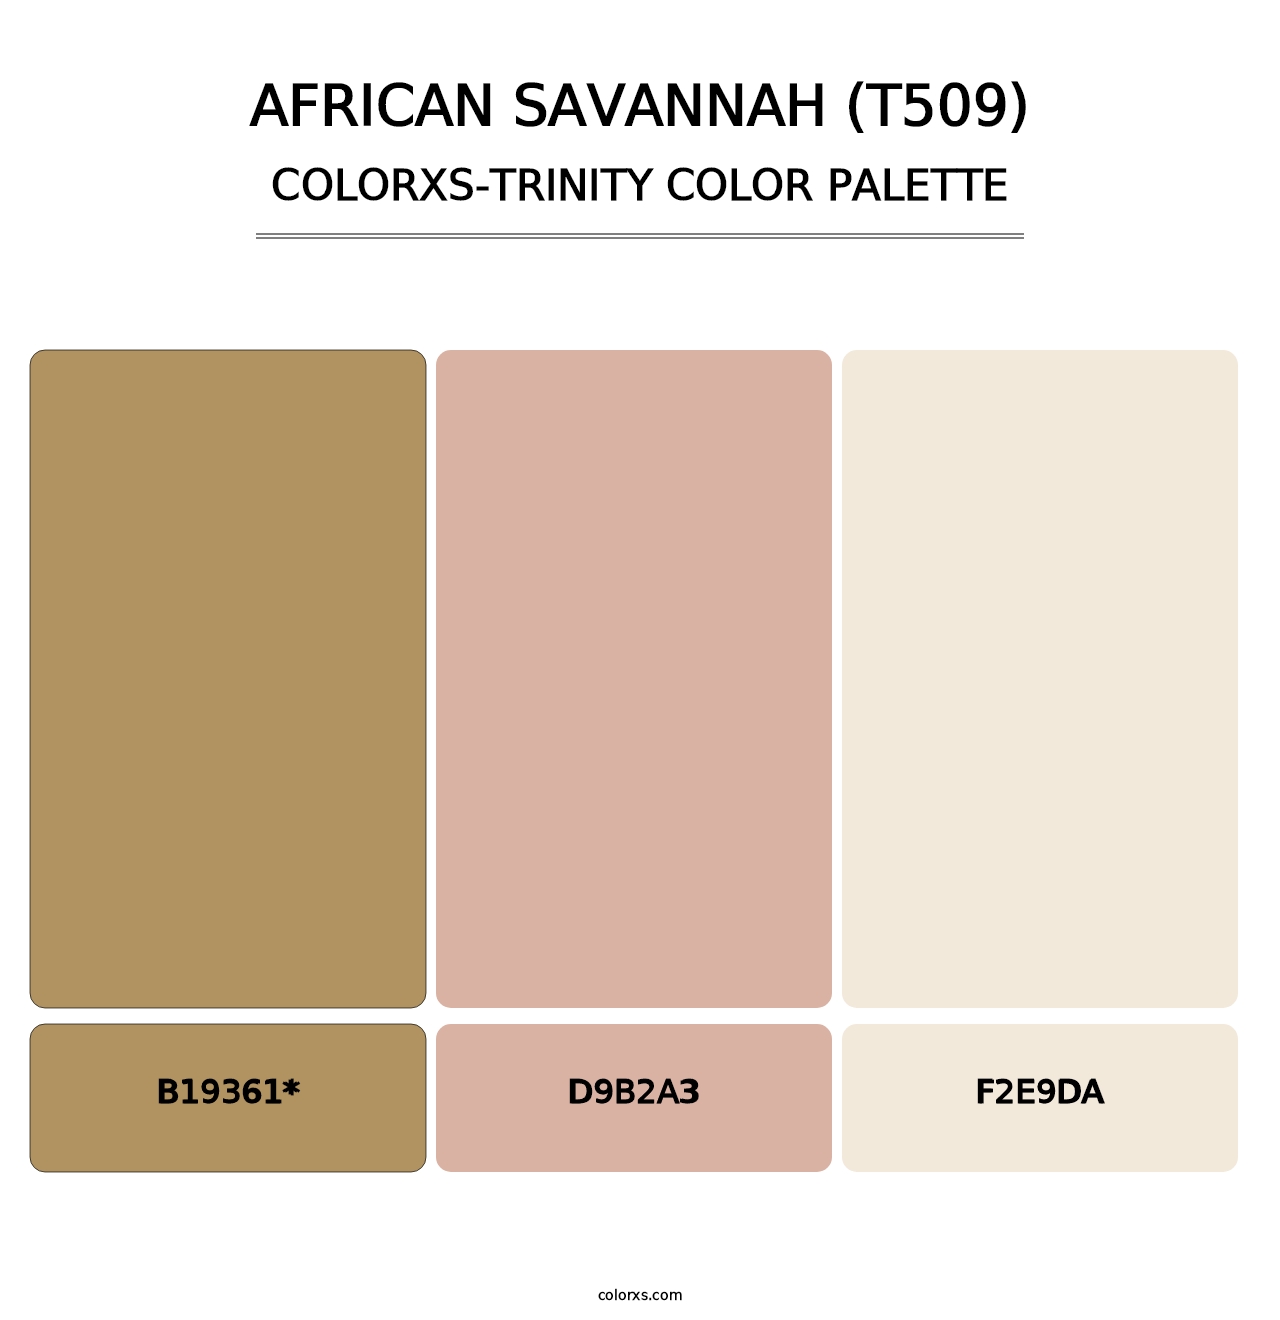 African Savannah (T509) - Colorxs Trinity Palette